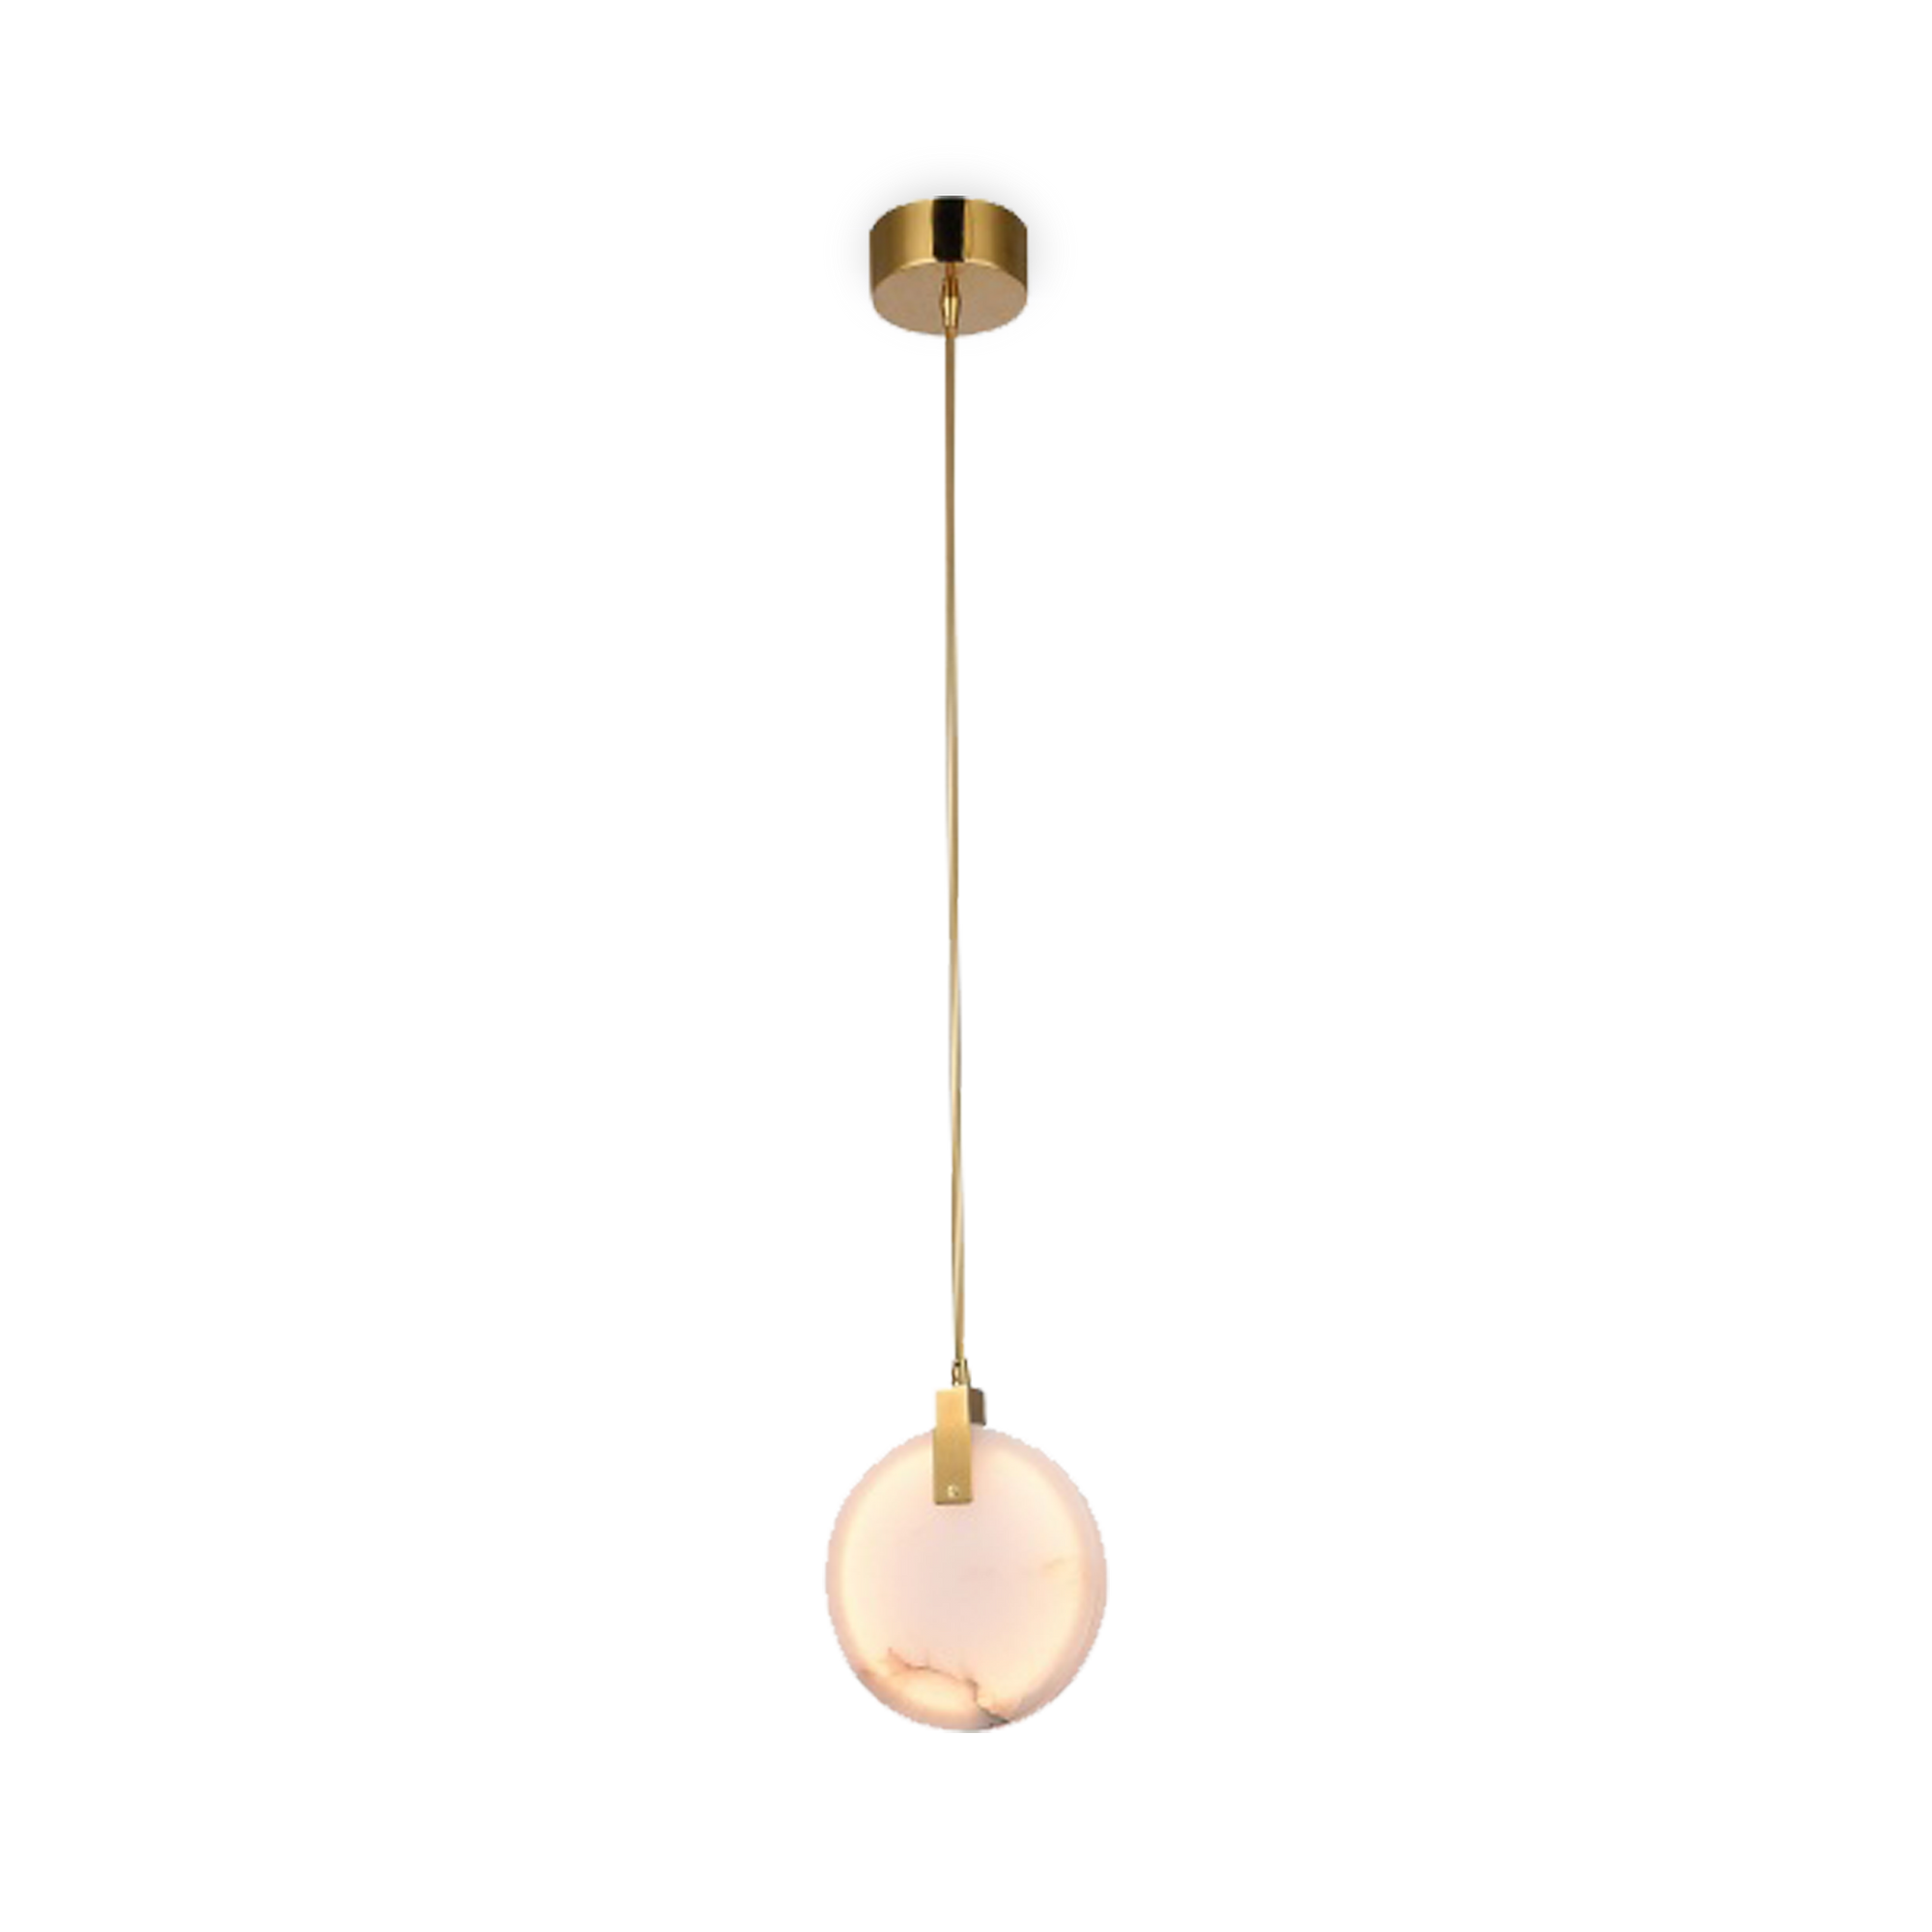 Single pendant LED light crafted in stainless steel with gold finish and a round spanish marble plaque.